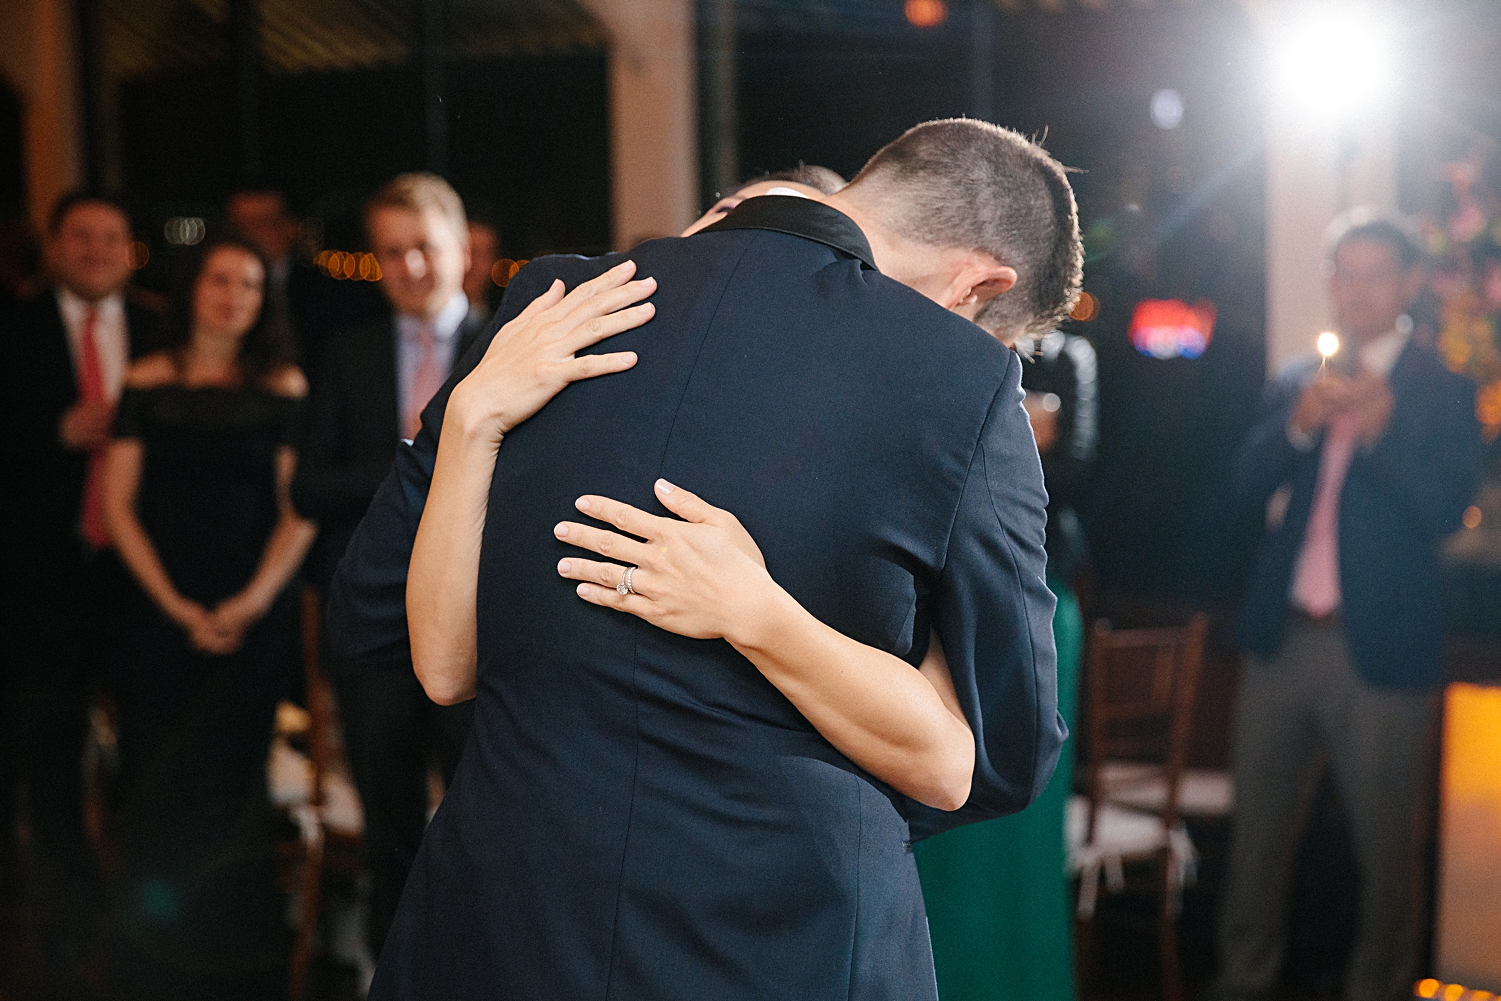 bride and groom hugging after first dance at wedding reception at water club new york city